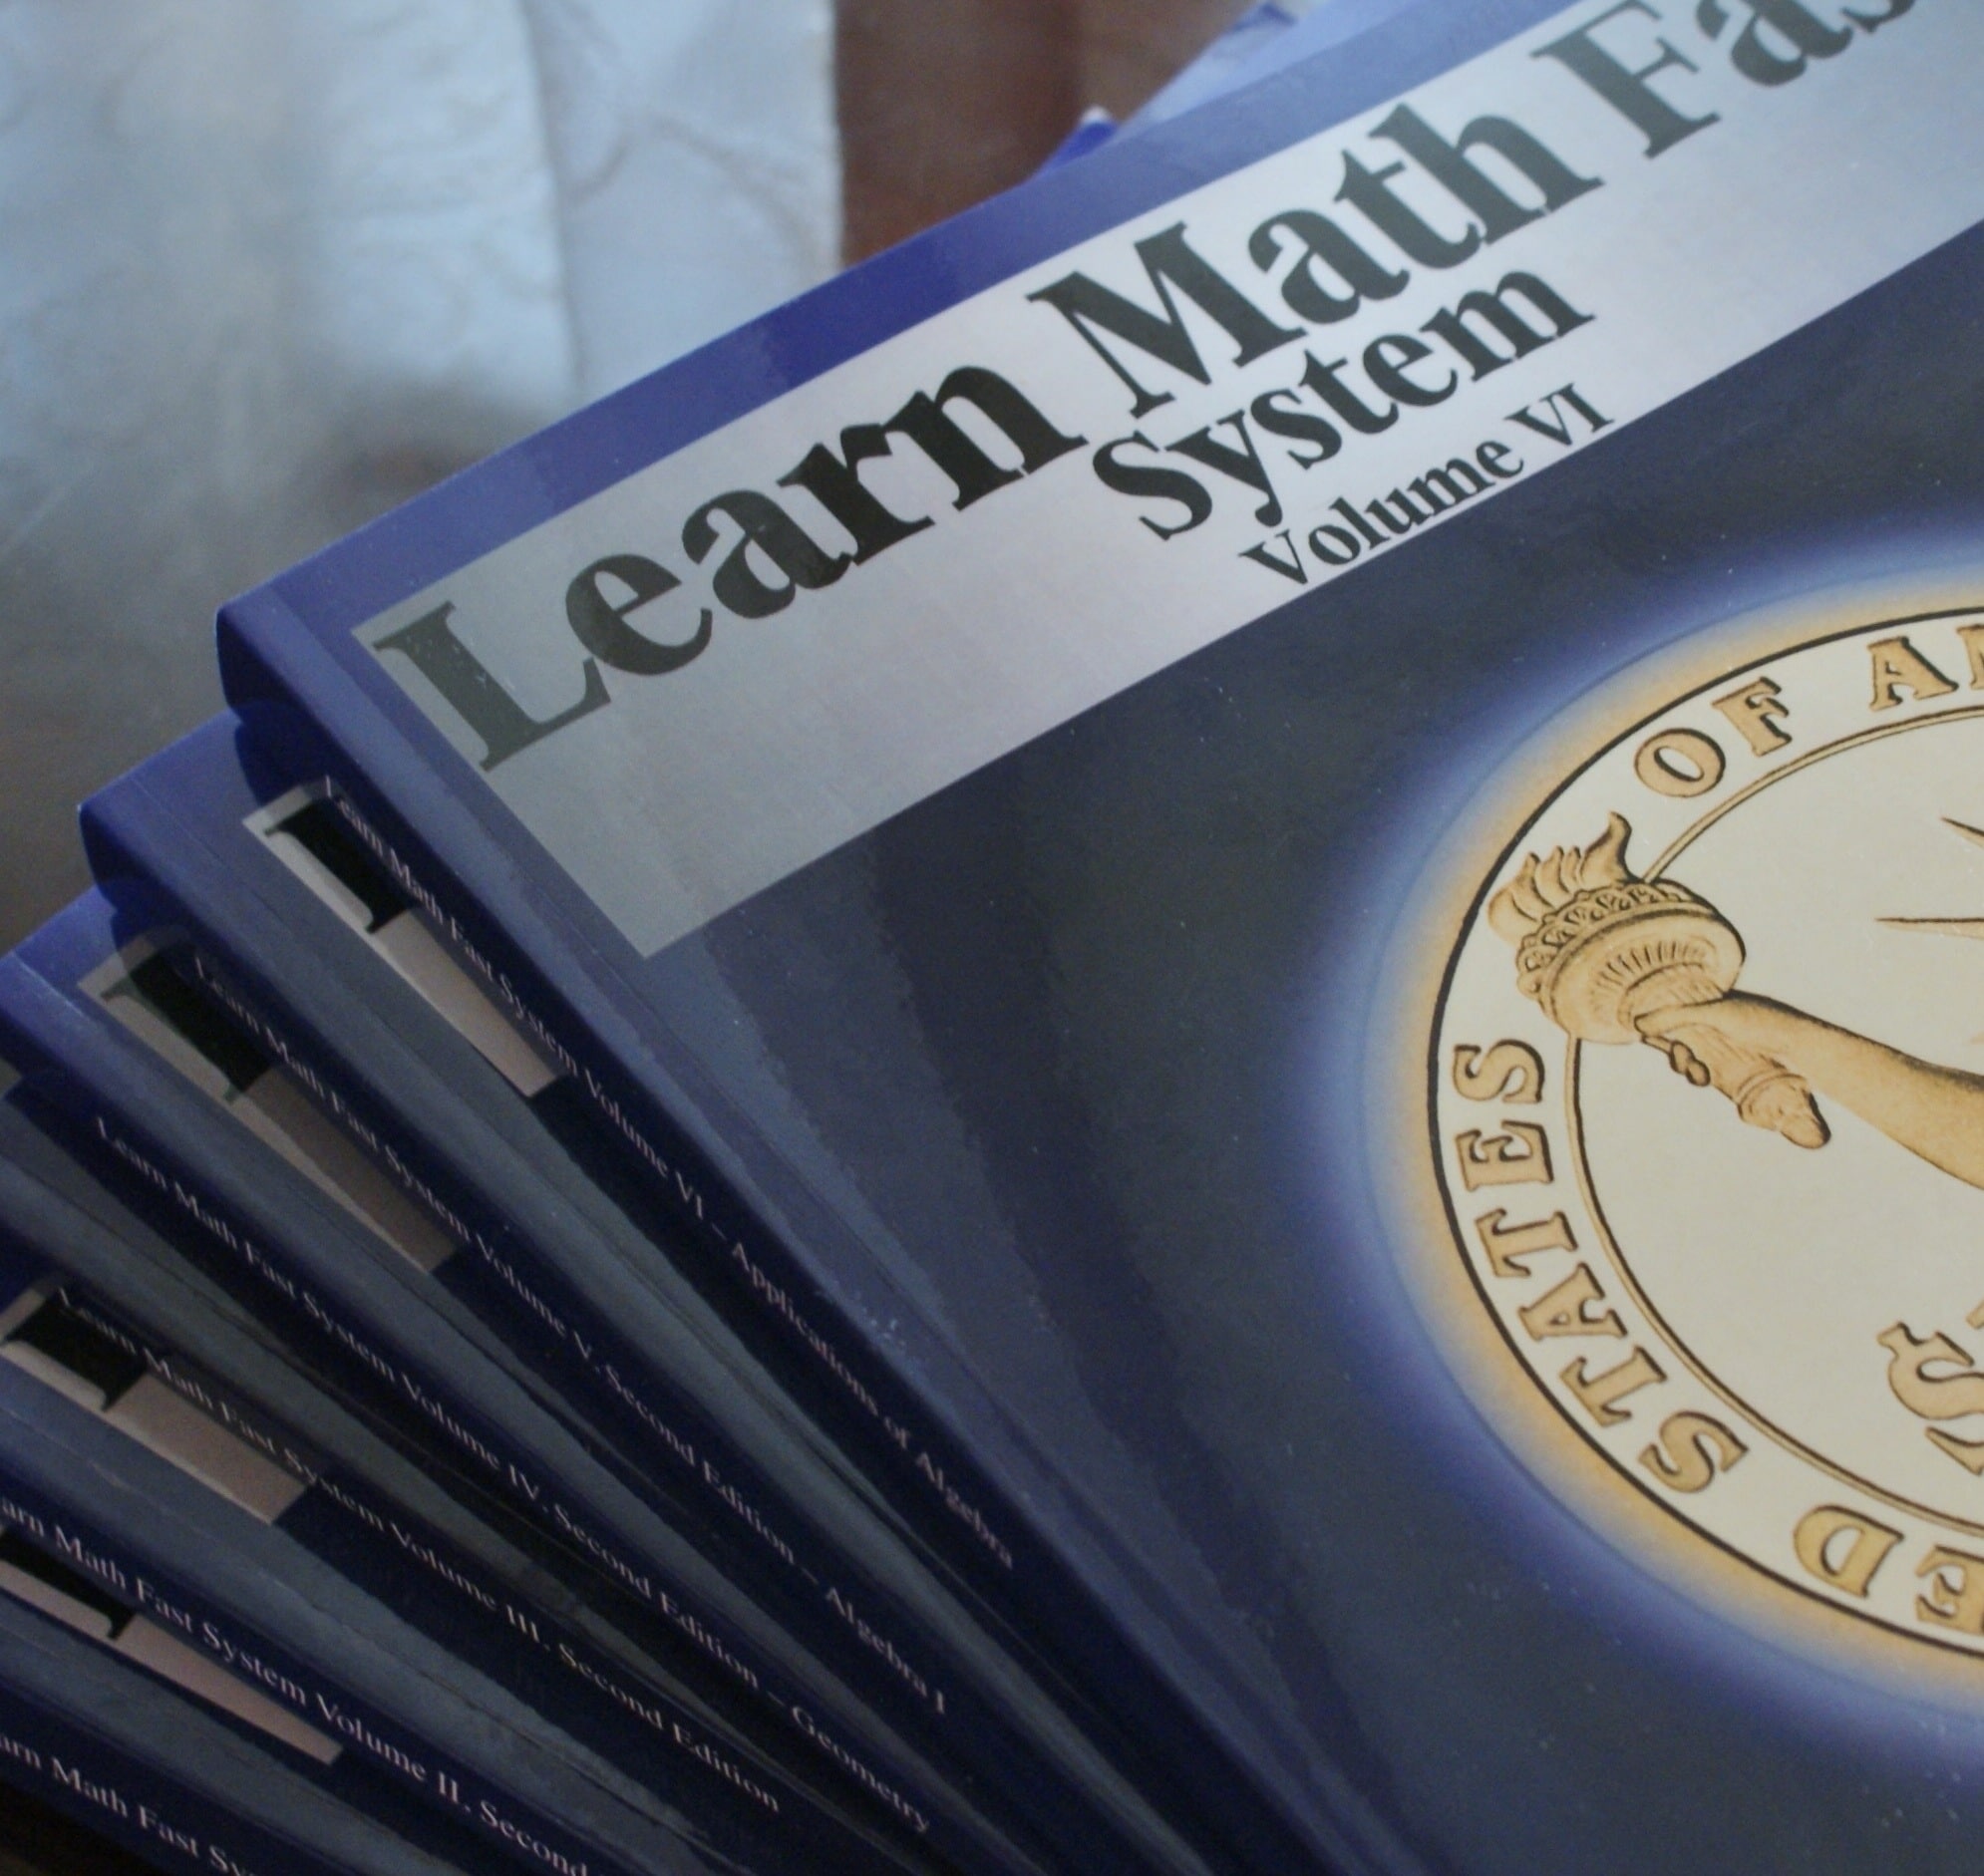 learn-math-fast-review-the-curriculum-choice